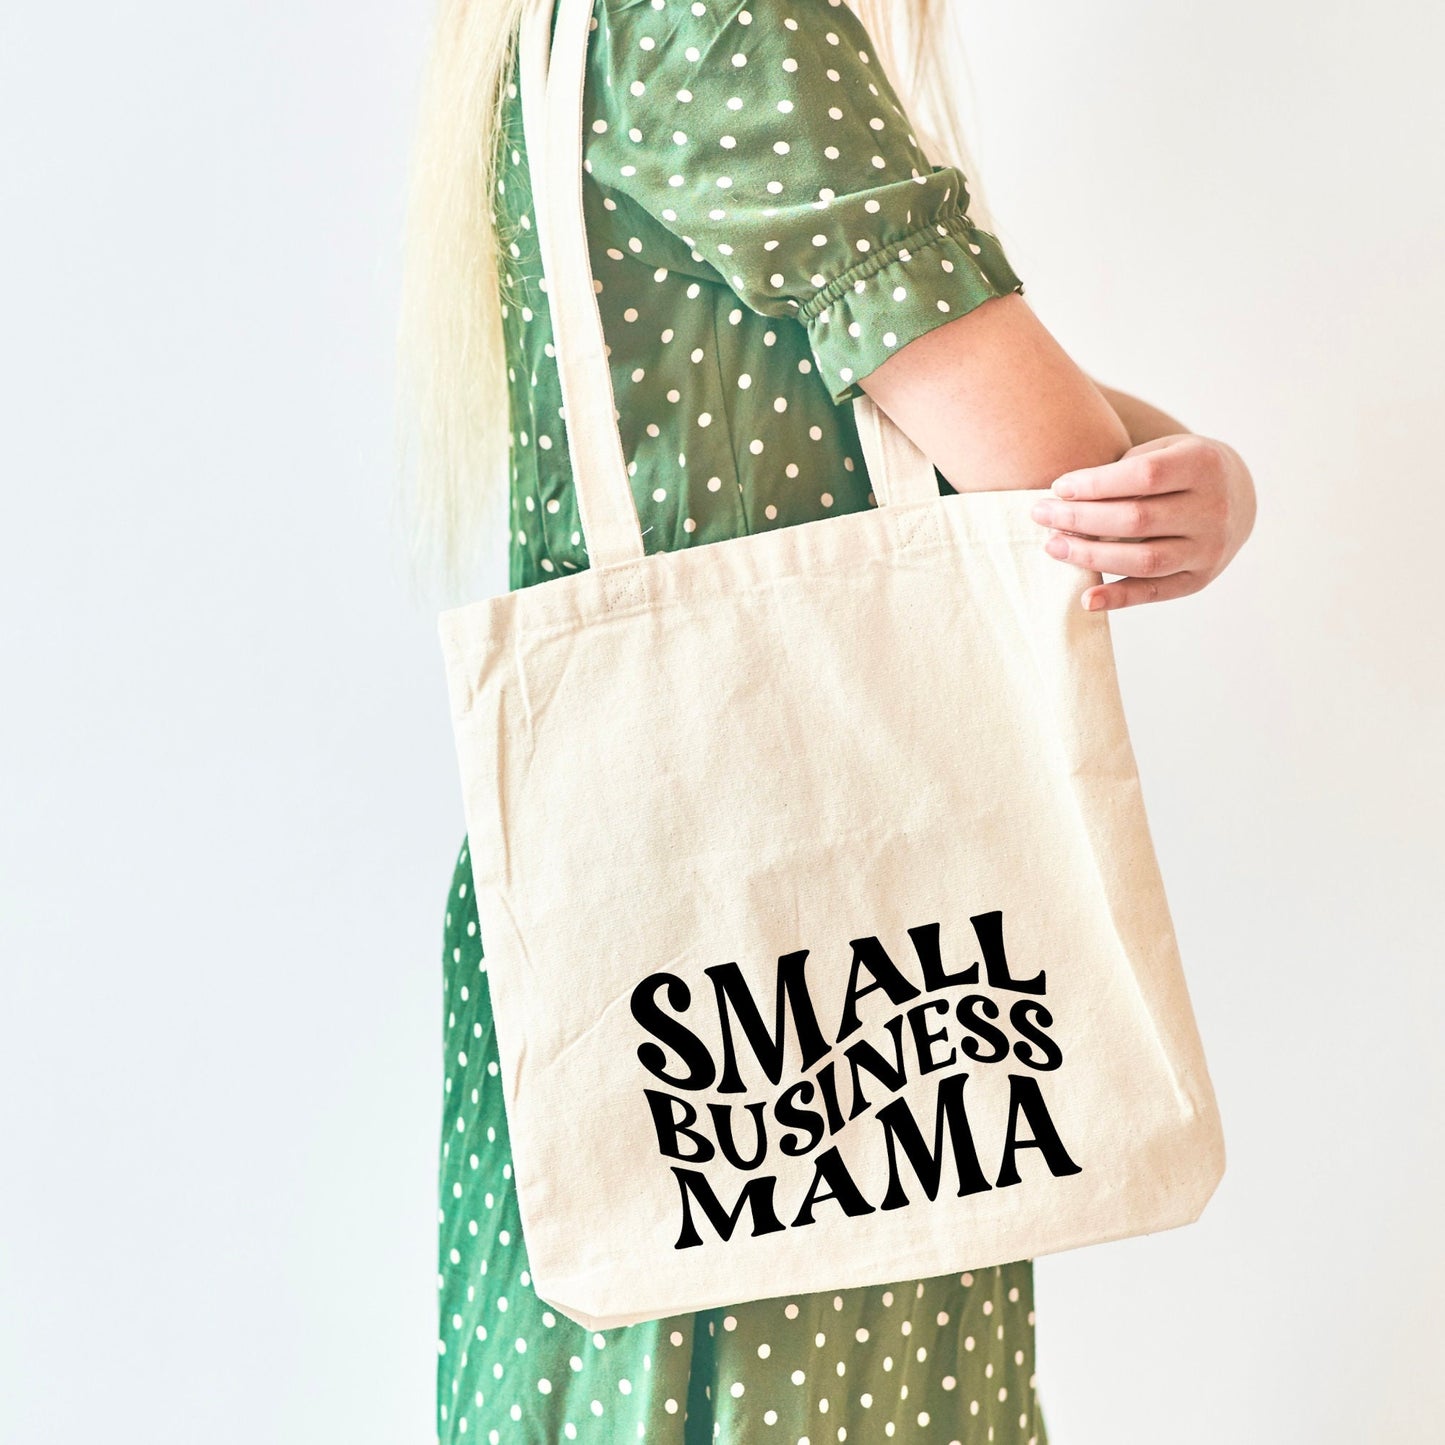 Small business mama tote bag, custom reusable shopping bag, Christmas gift for small biz mums, daughters . neutral canvas tote long handles